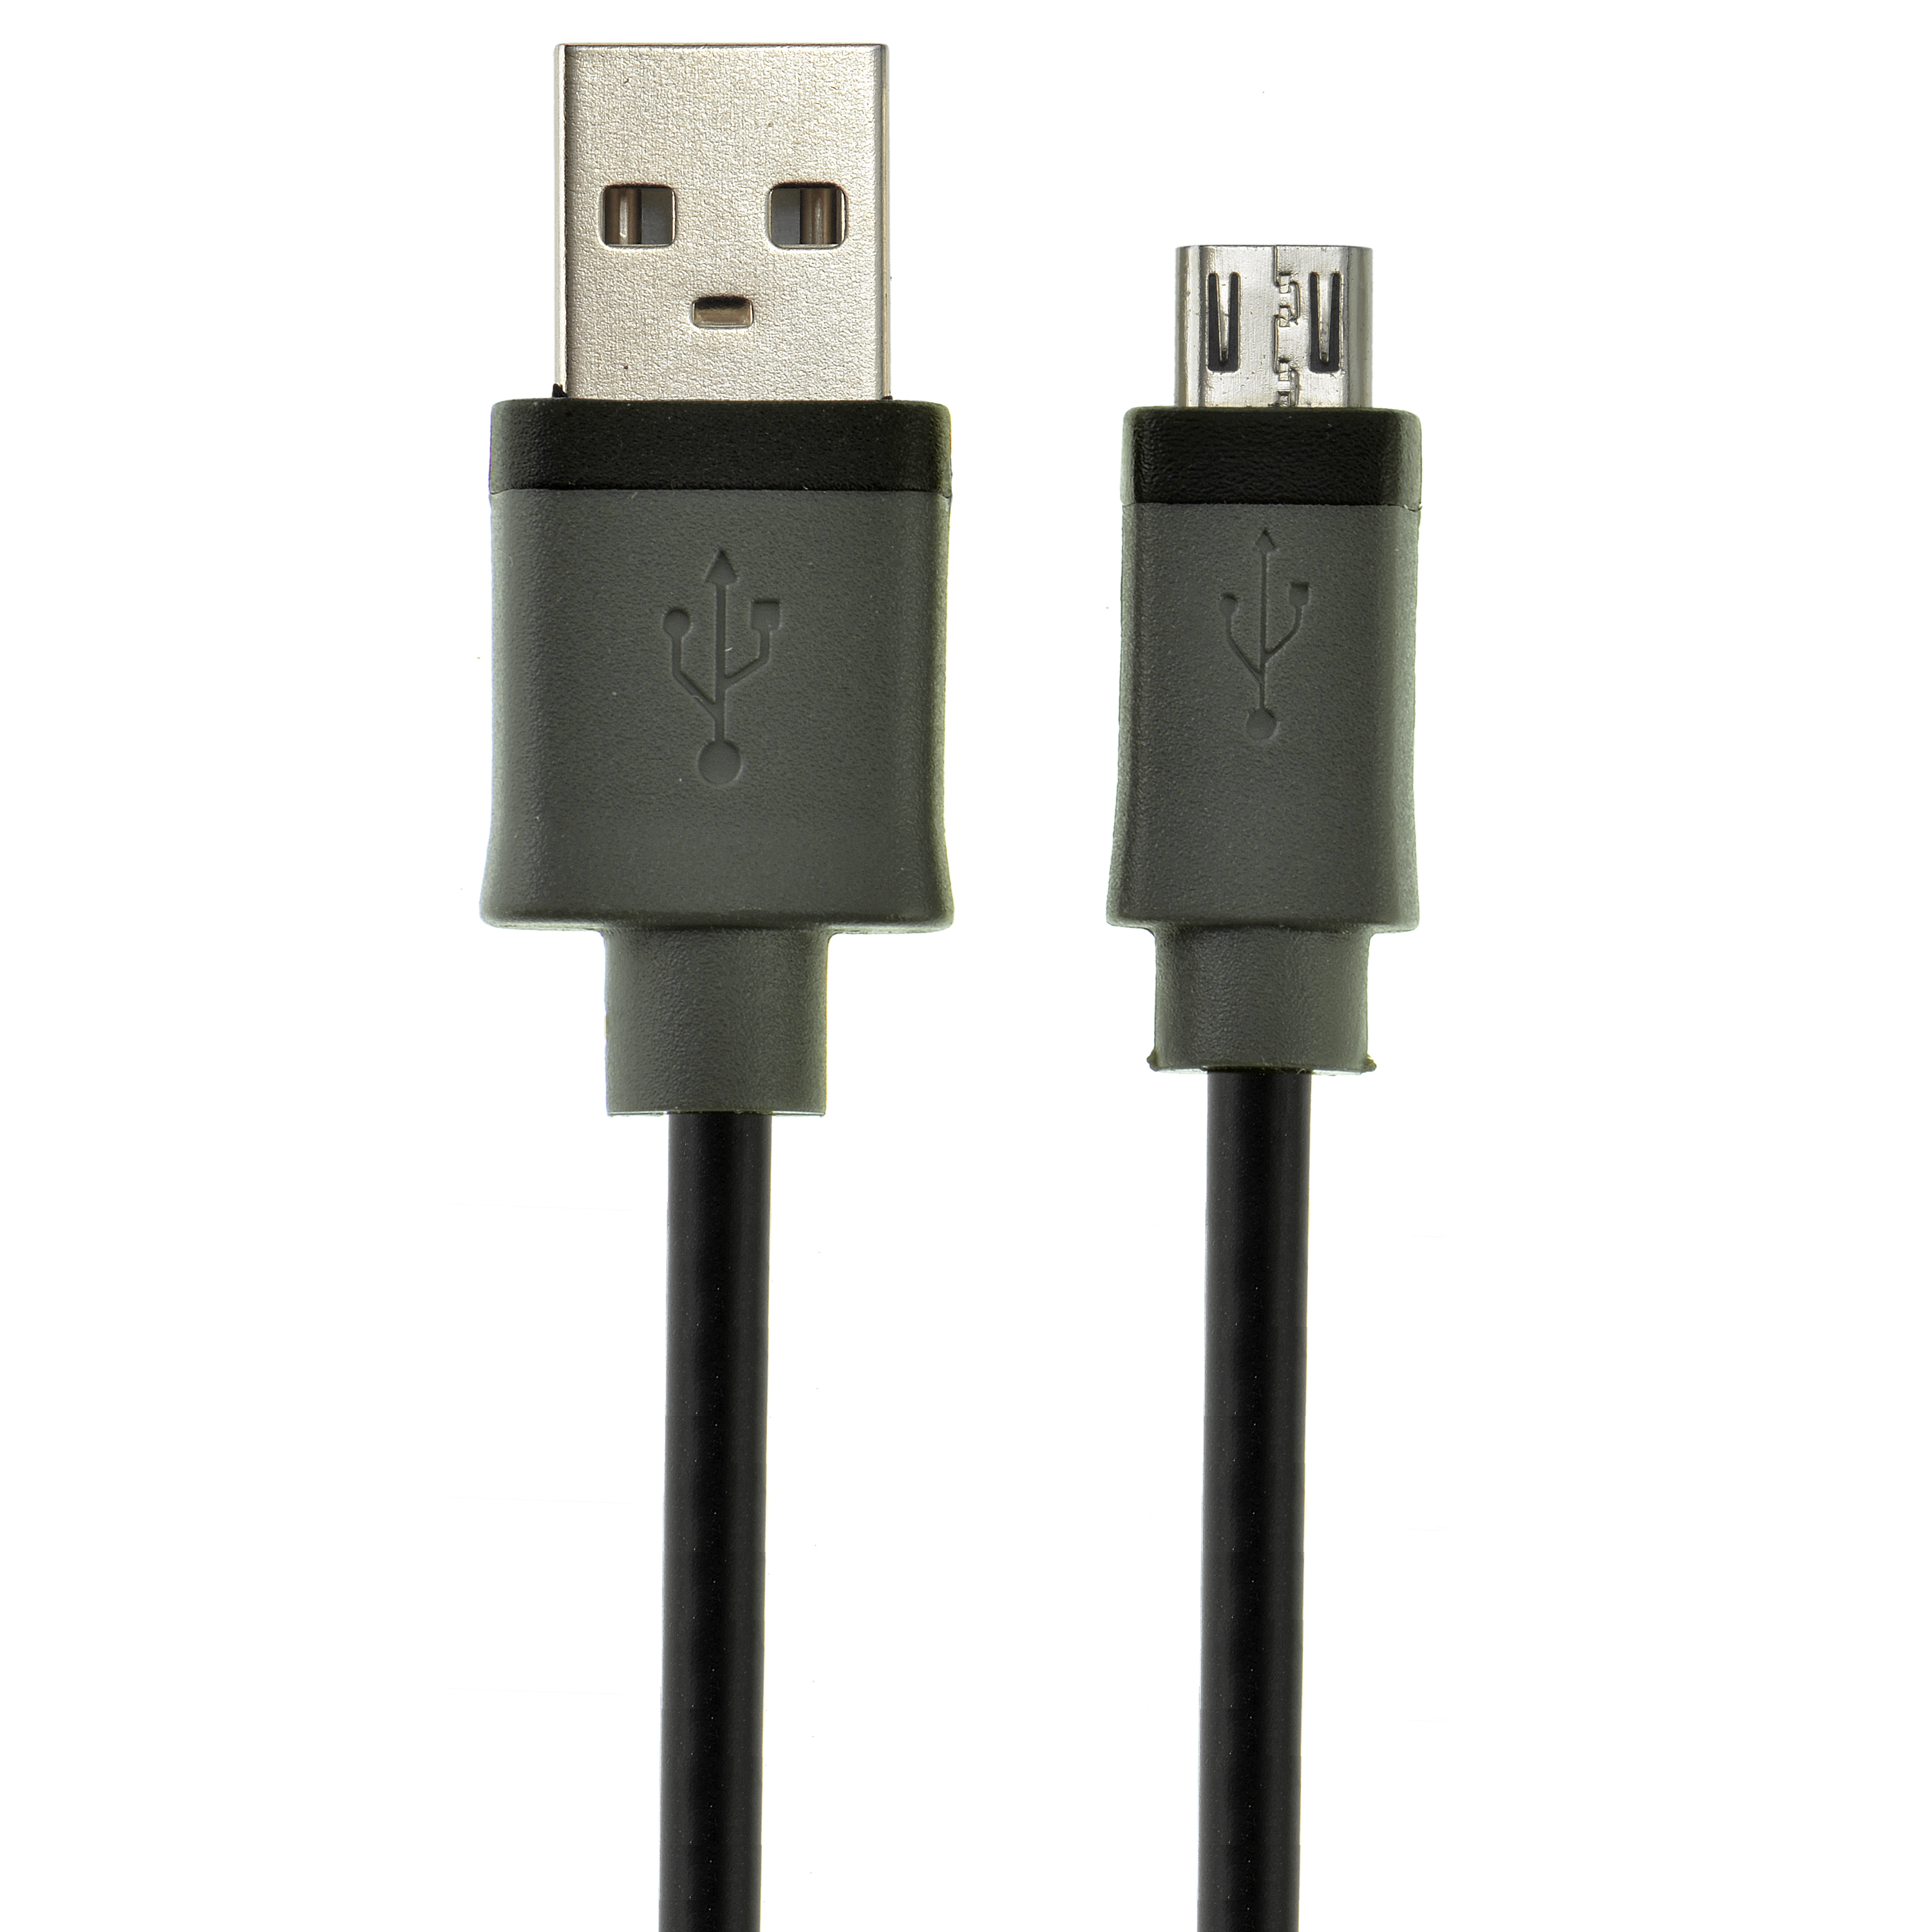 Shop New USB 2.0 - to USB Cable - High-Speed A Male to Micro B (10 | Mediabridge Products